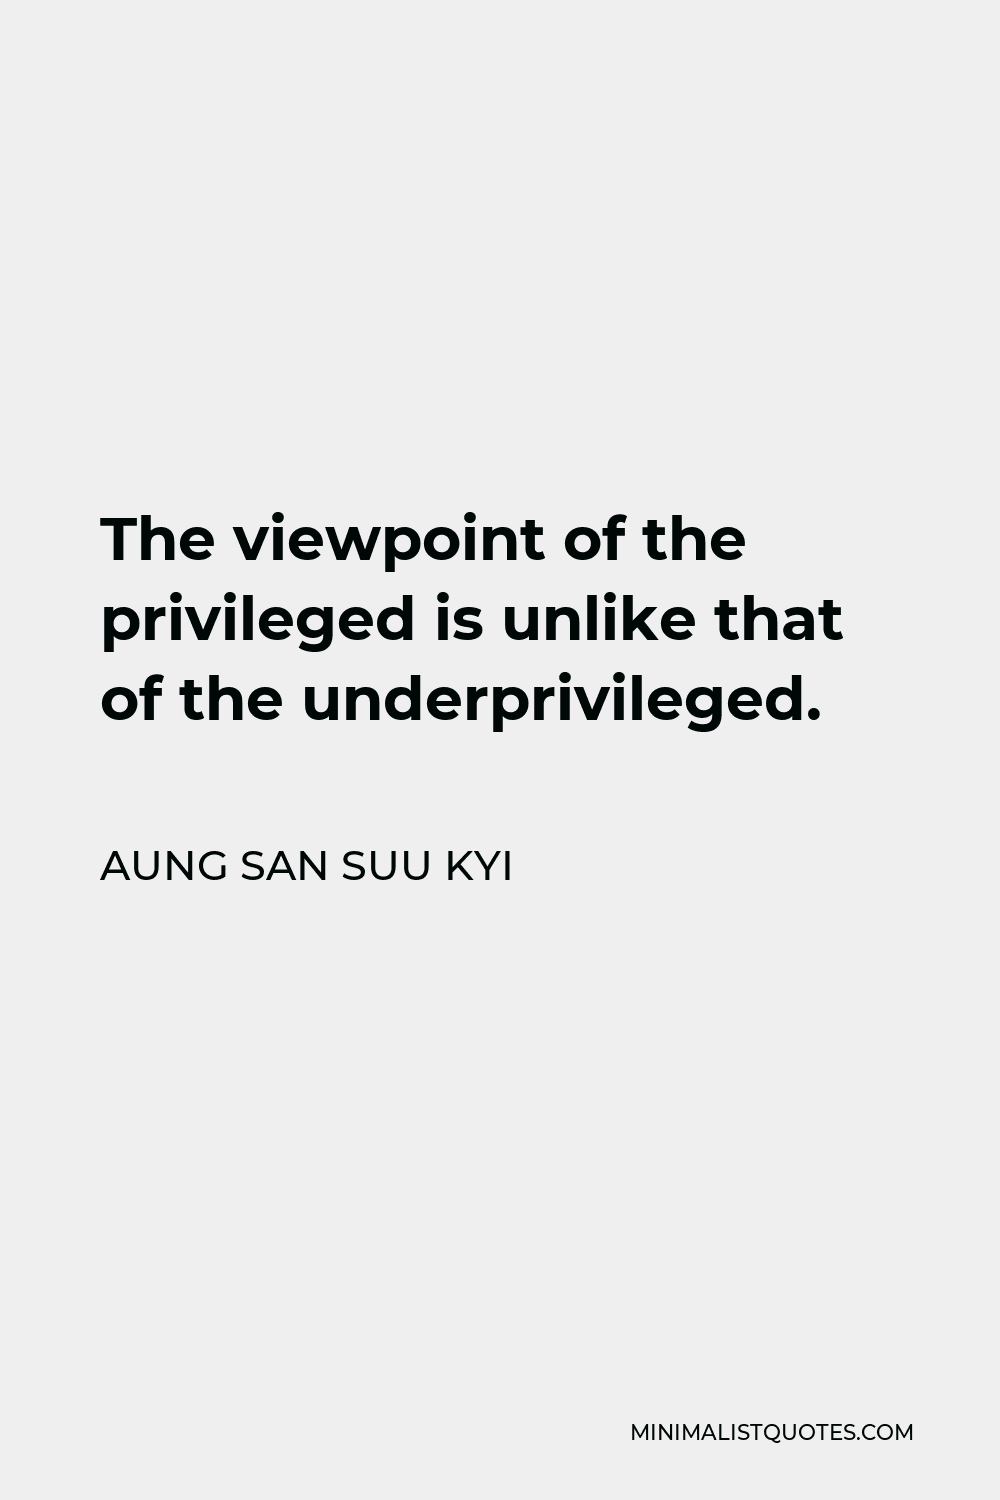 Aung San Suu Kyi Quote - The viewpoint of the privileged is unlike that of the underprivileged.